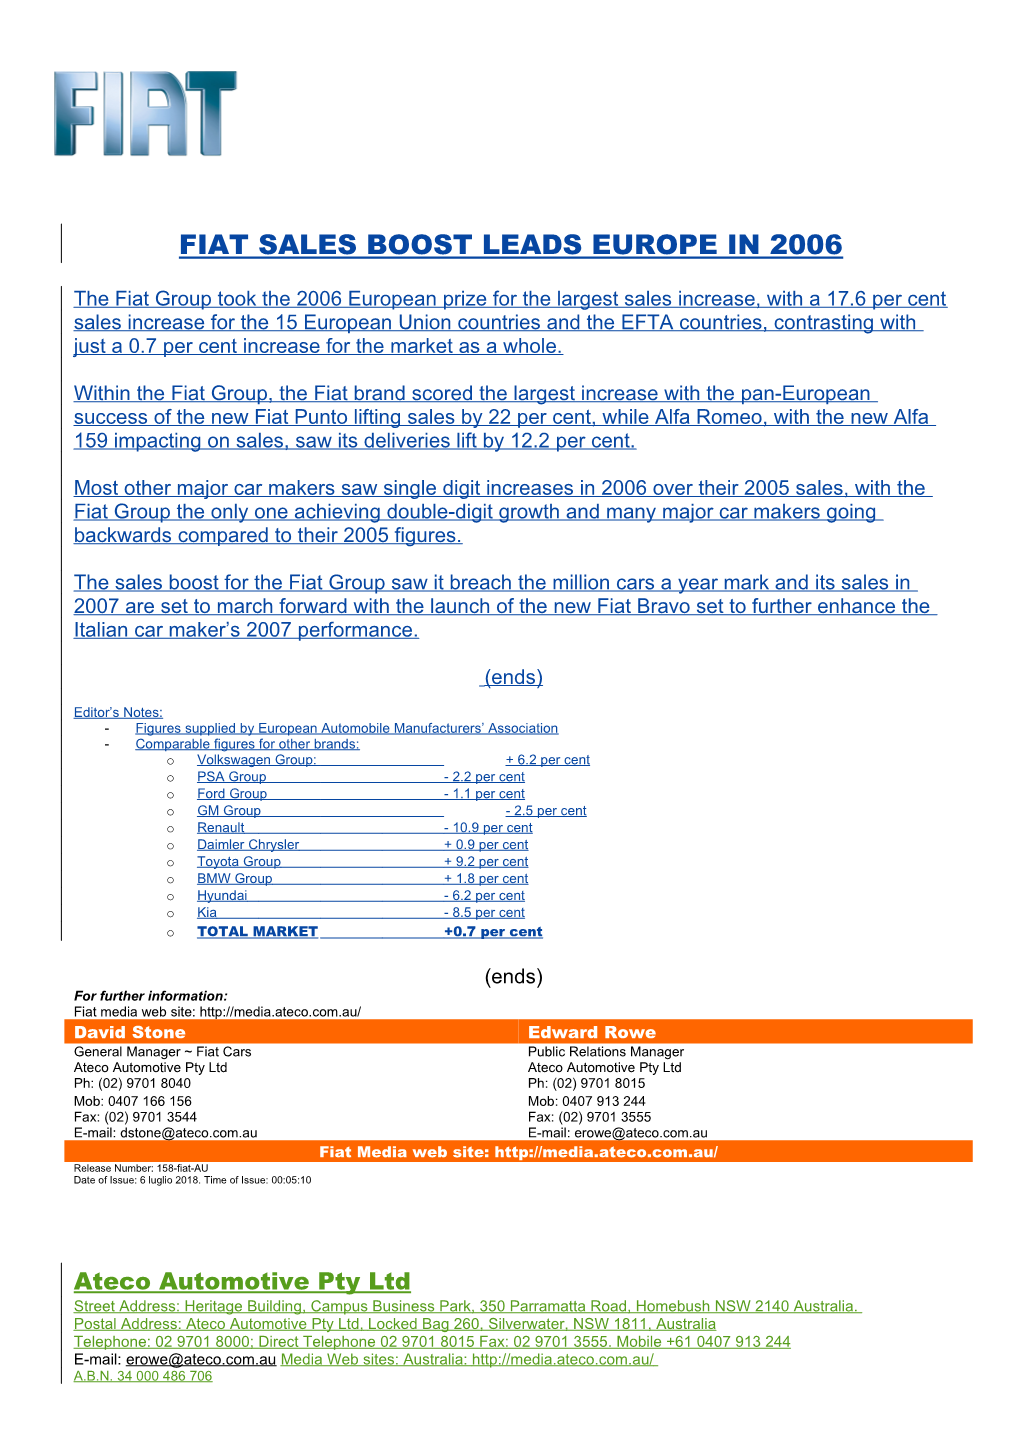 Fiat Sales Boost Leads Europe in 2006